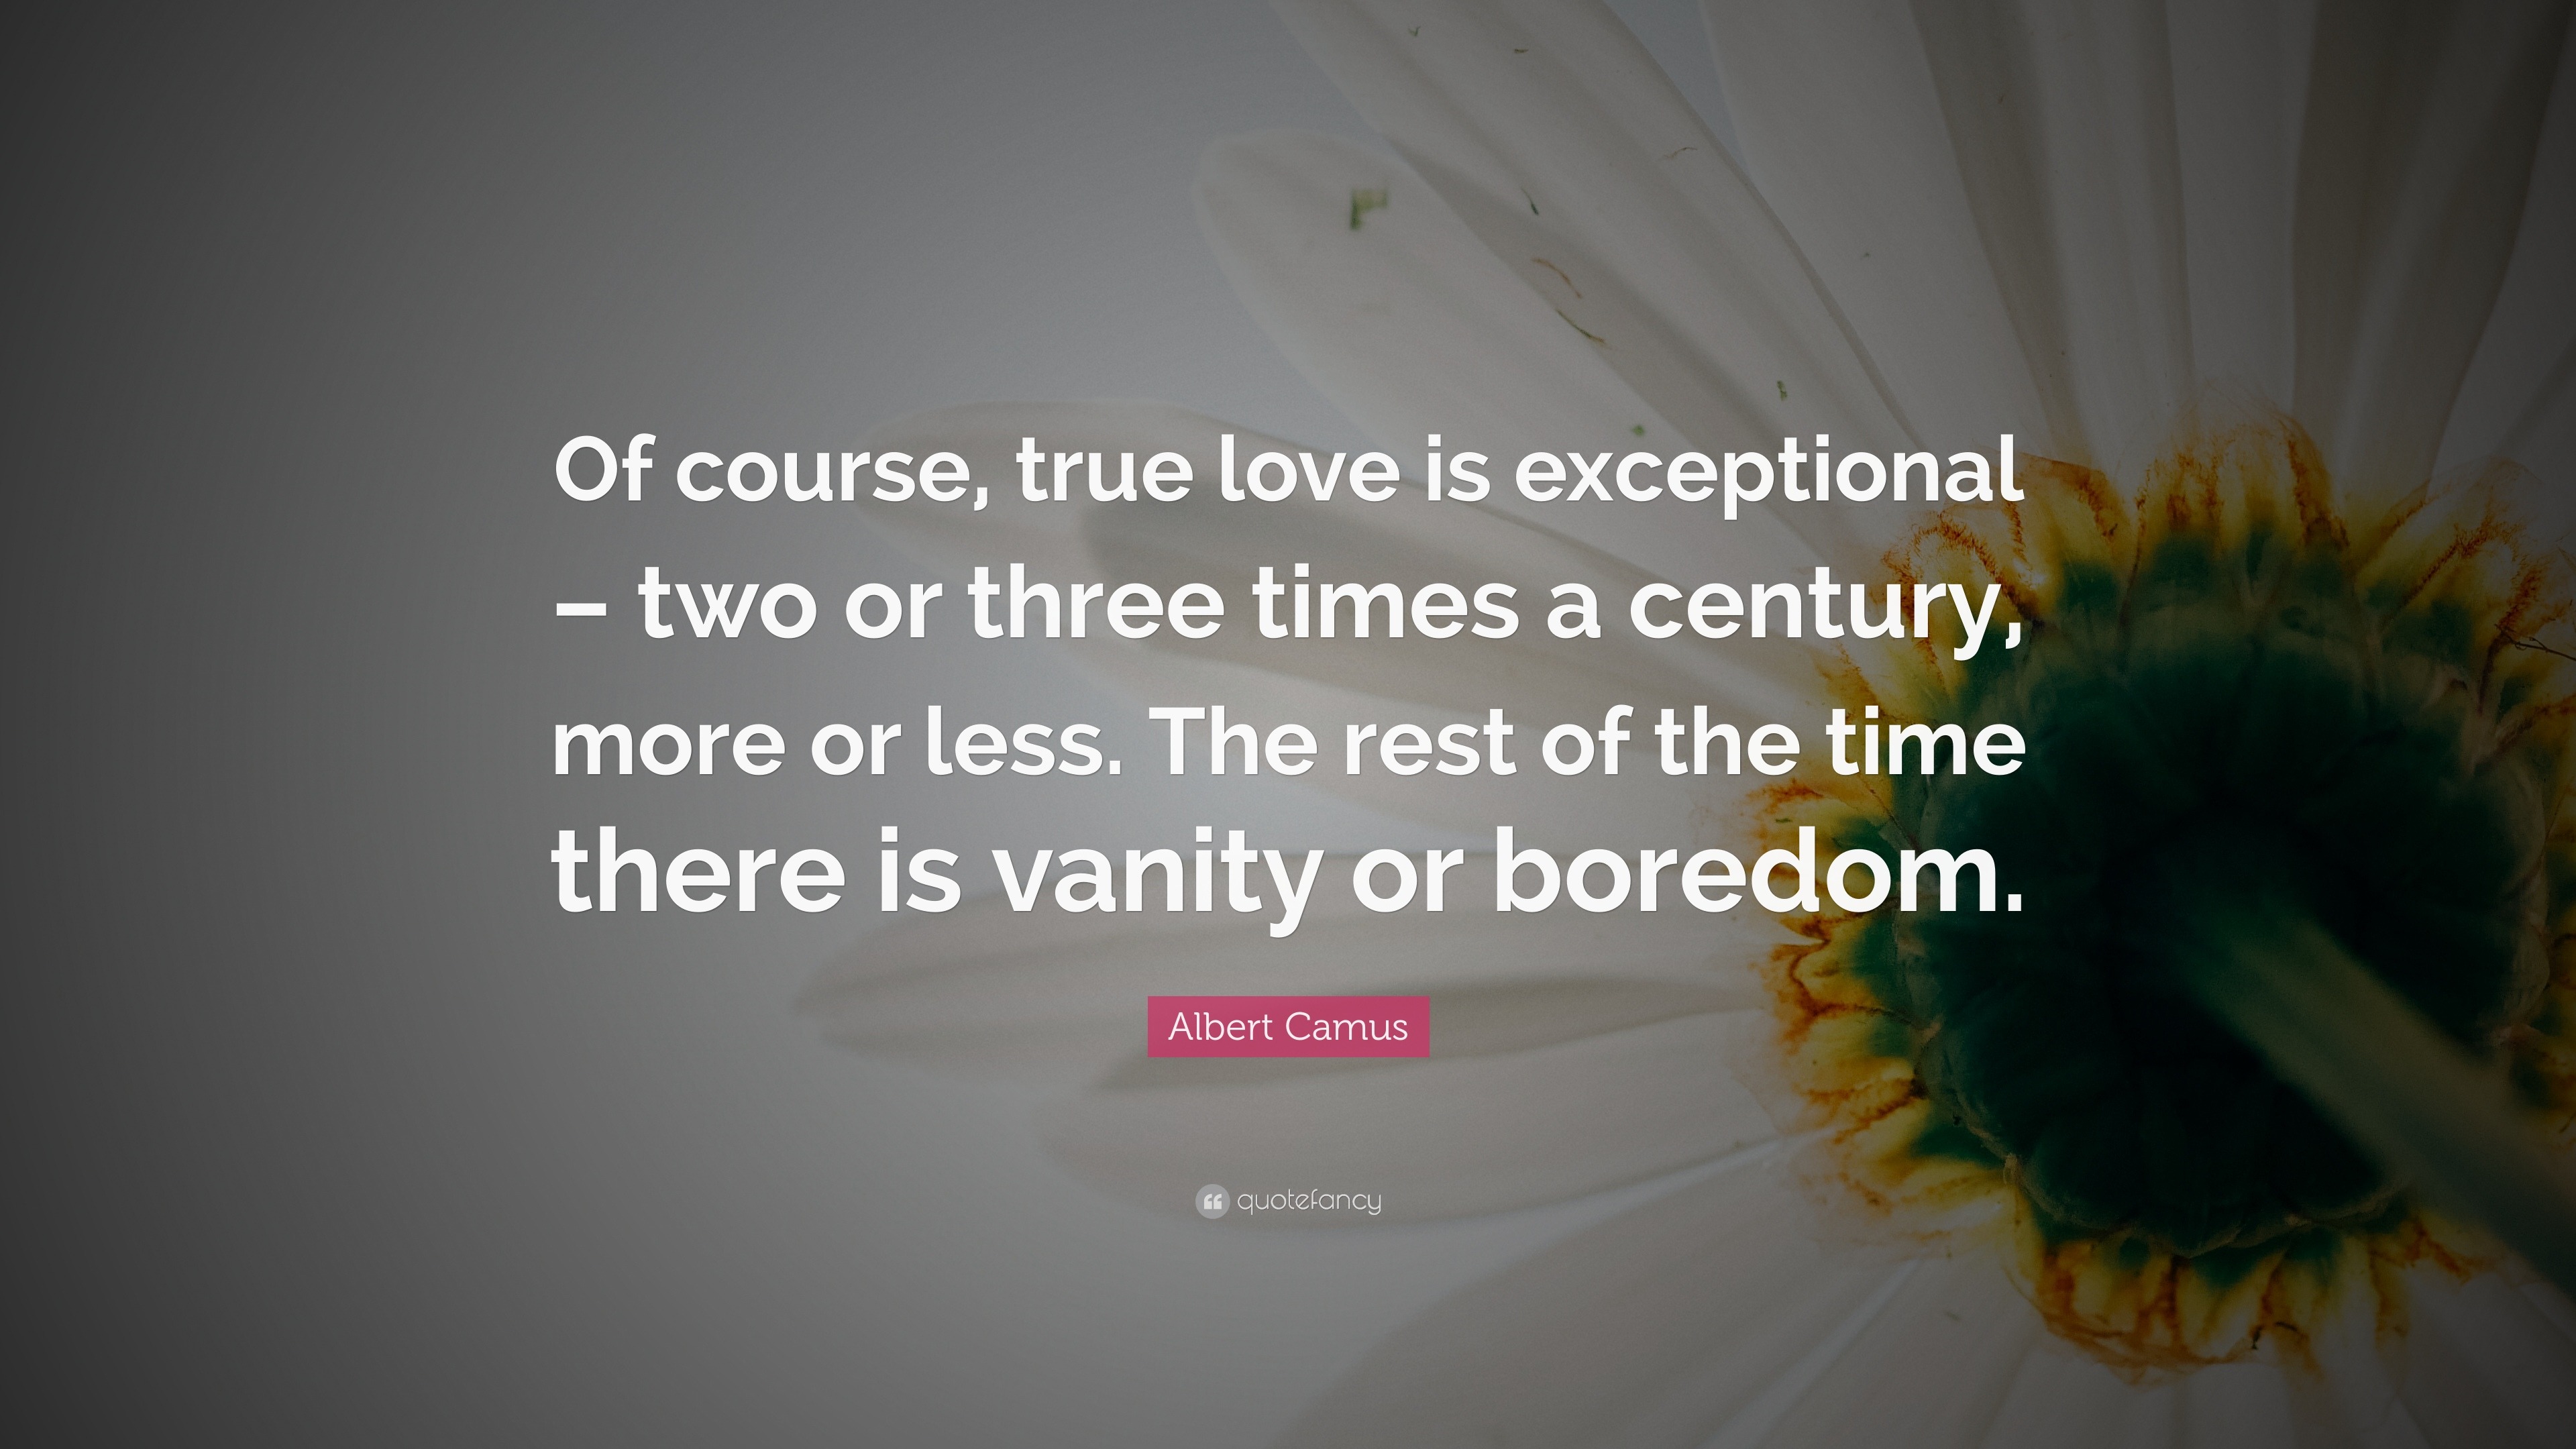 Albert Camus Quote “ course true love is exceptional – two or three